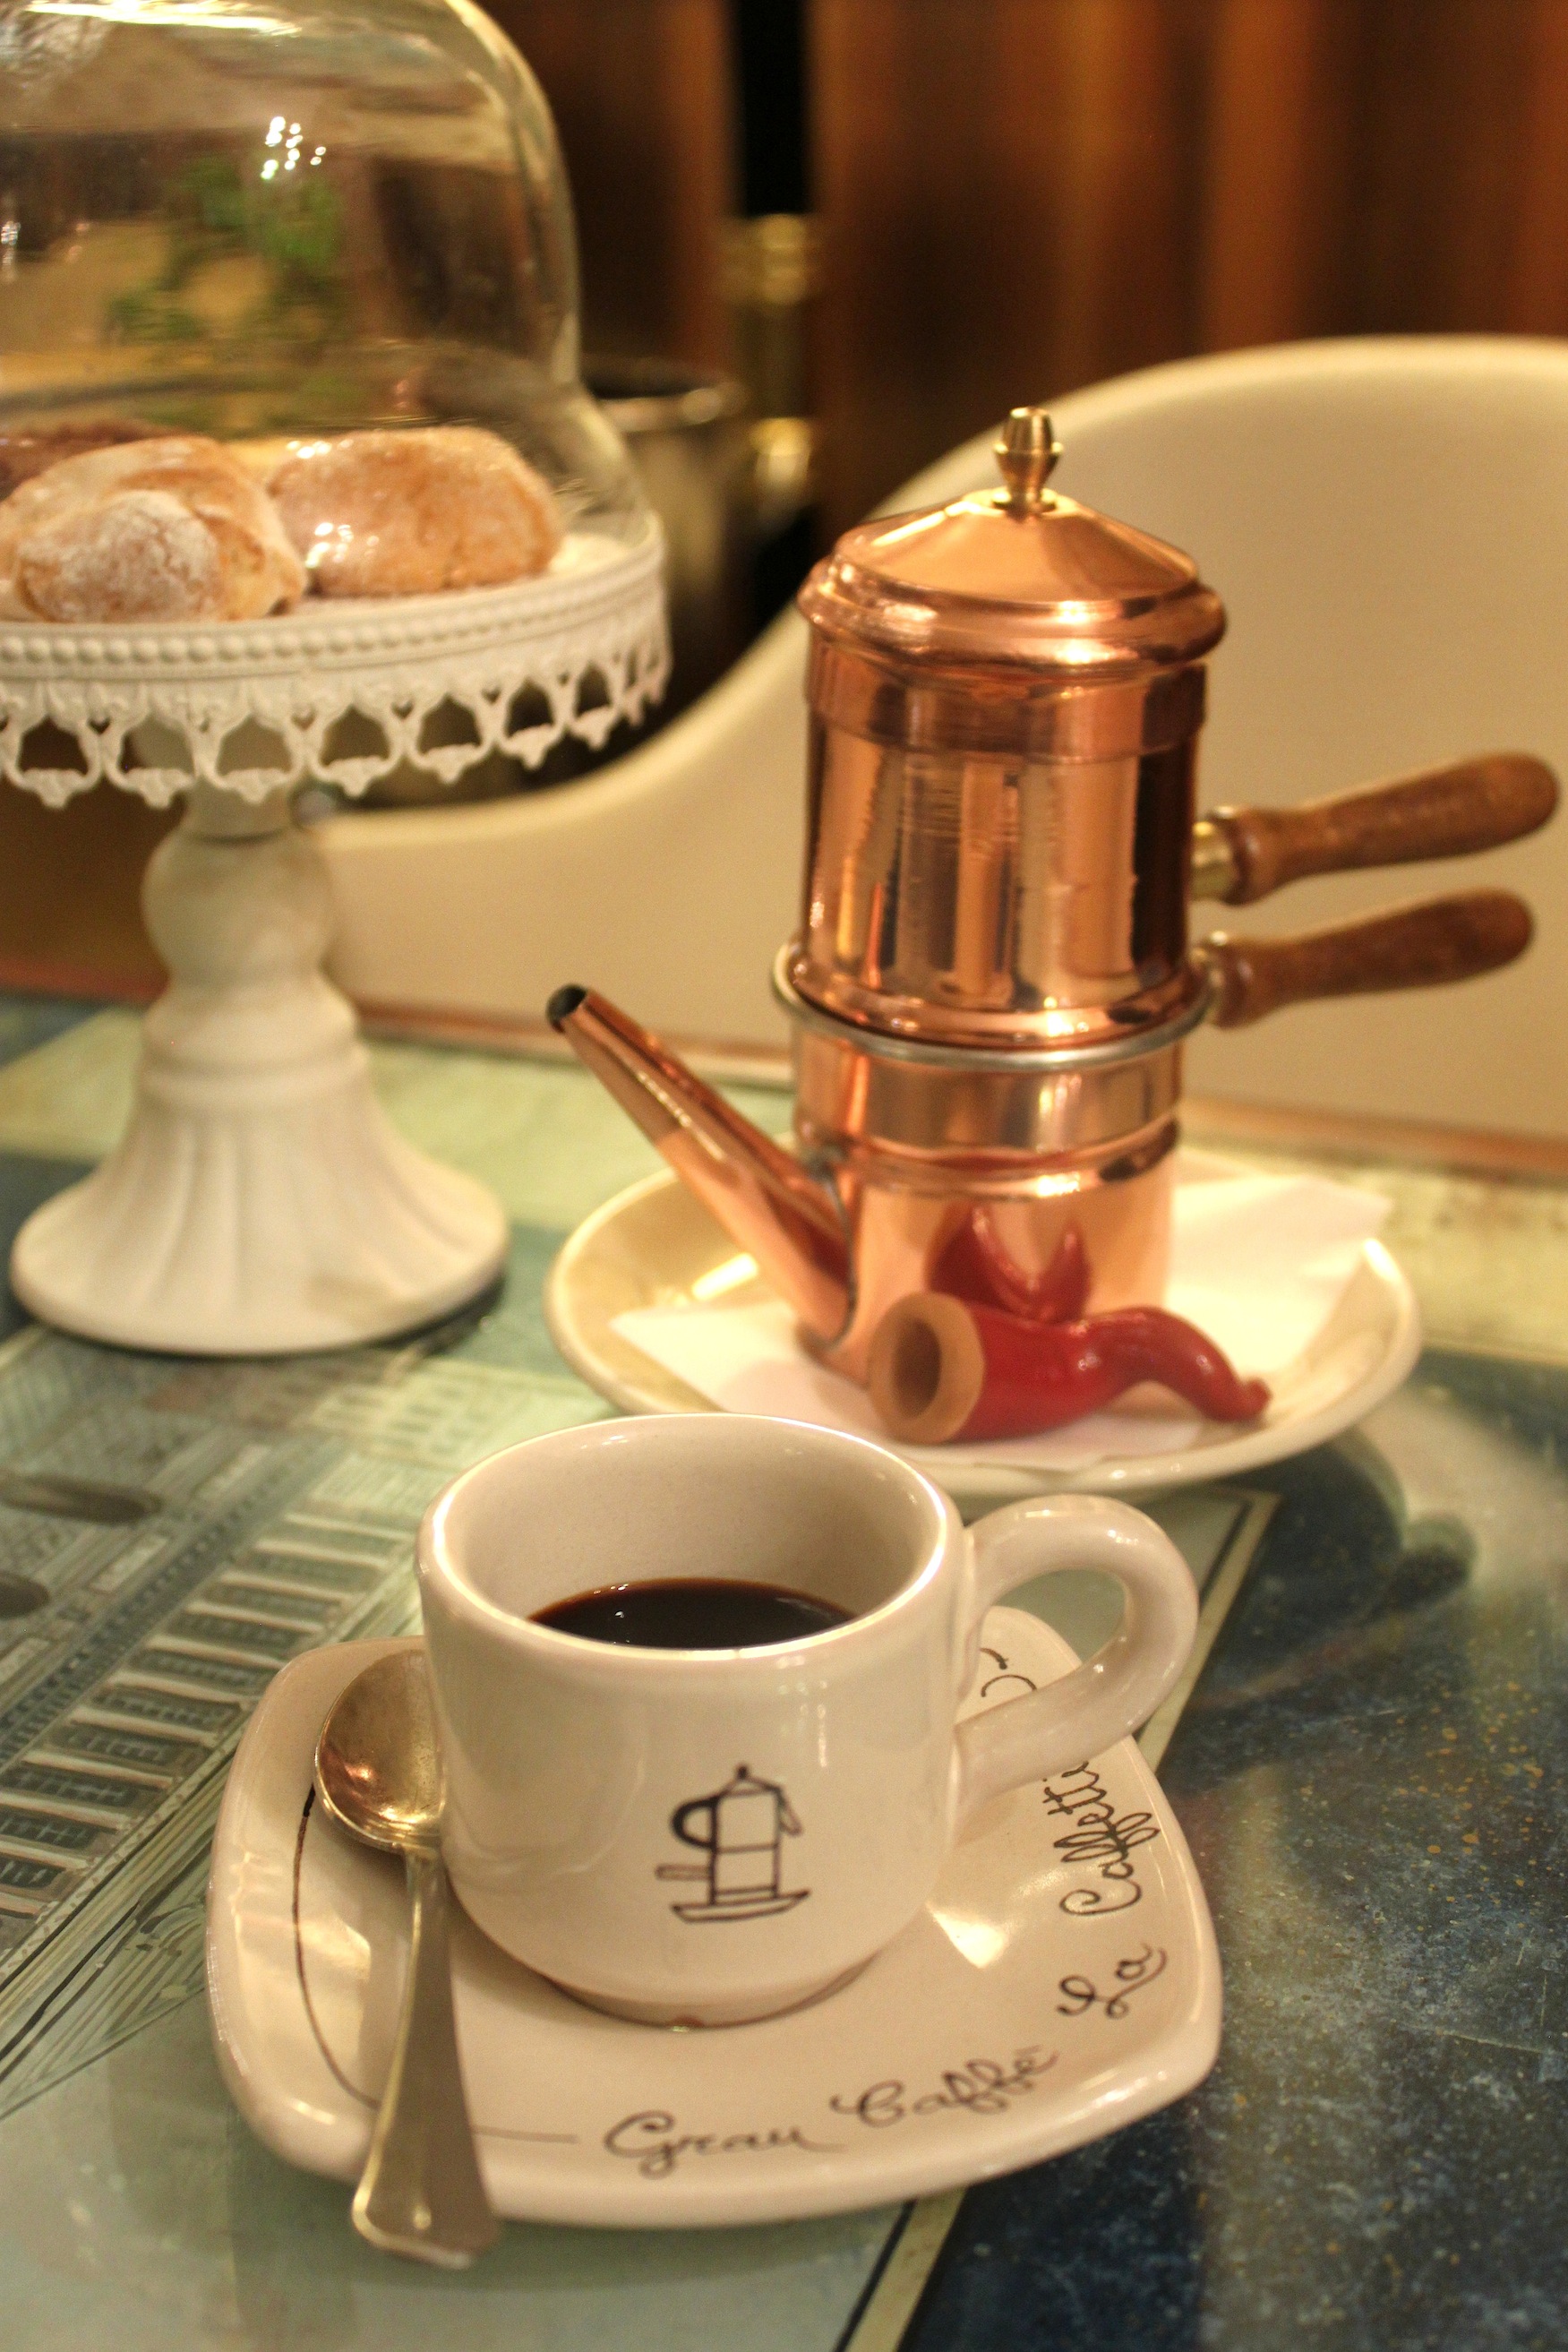 How to prepare coffee with the Neapolitan coffee maker 